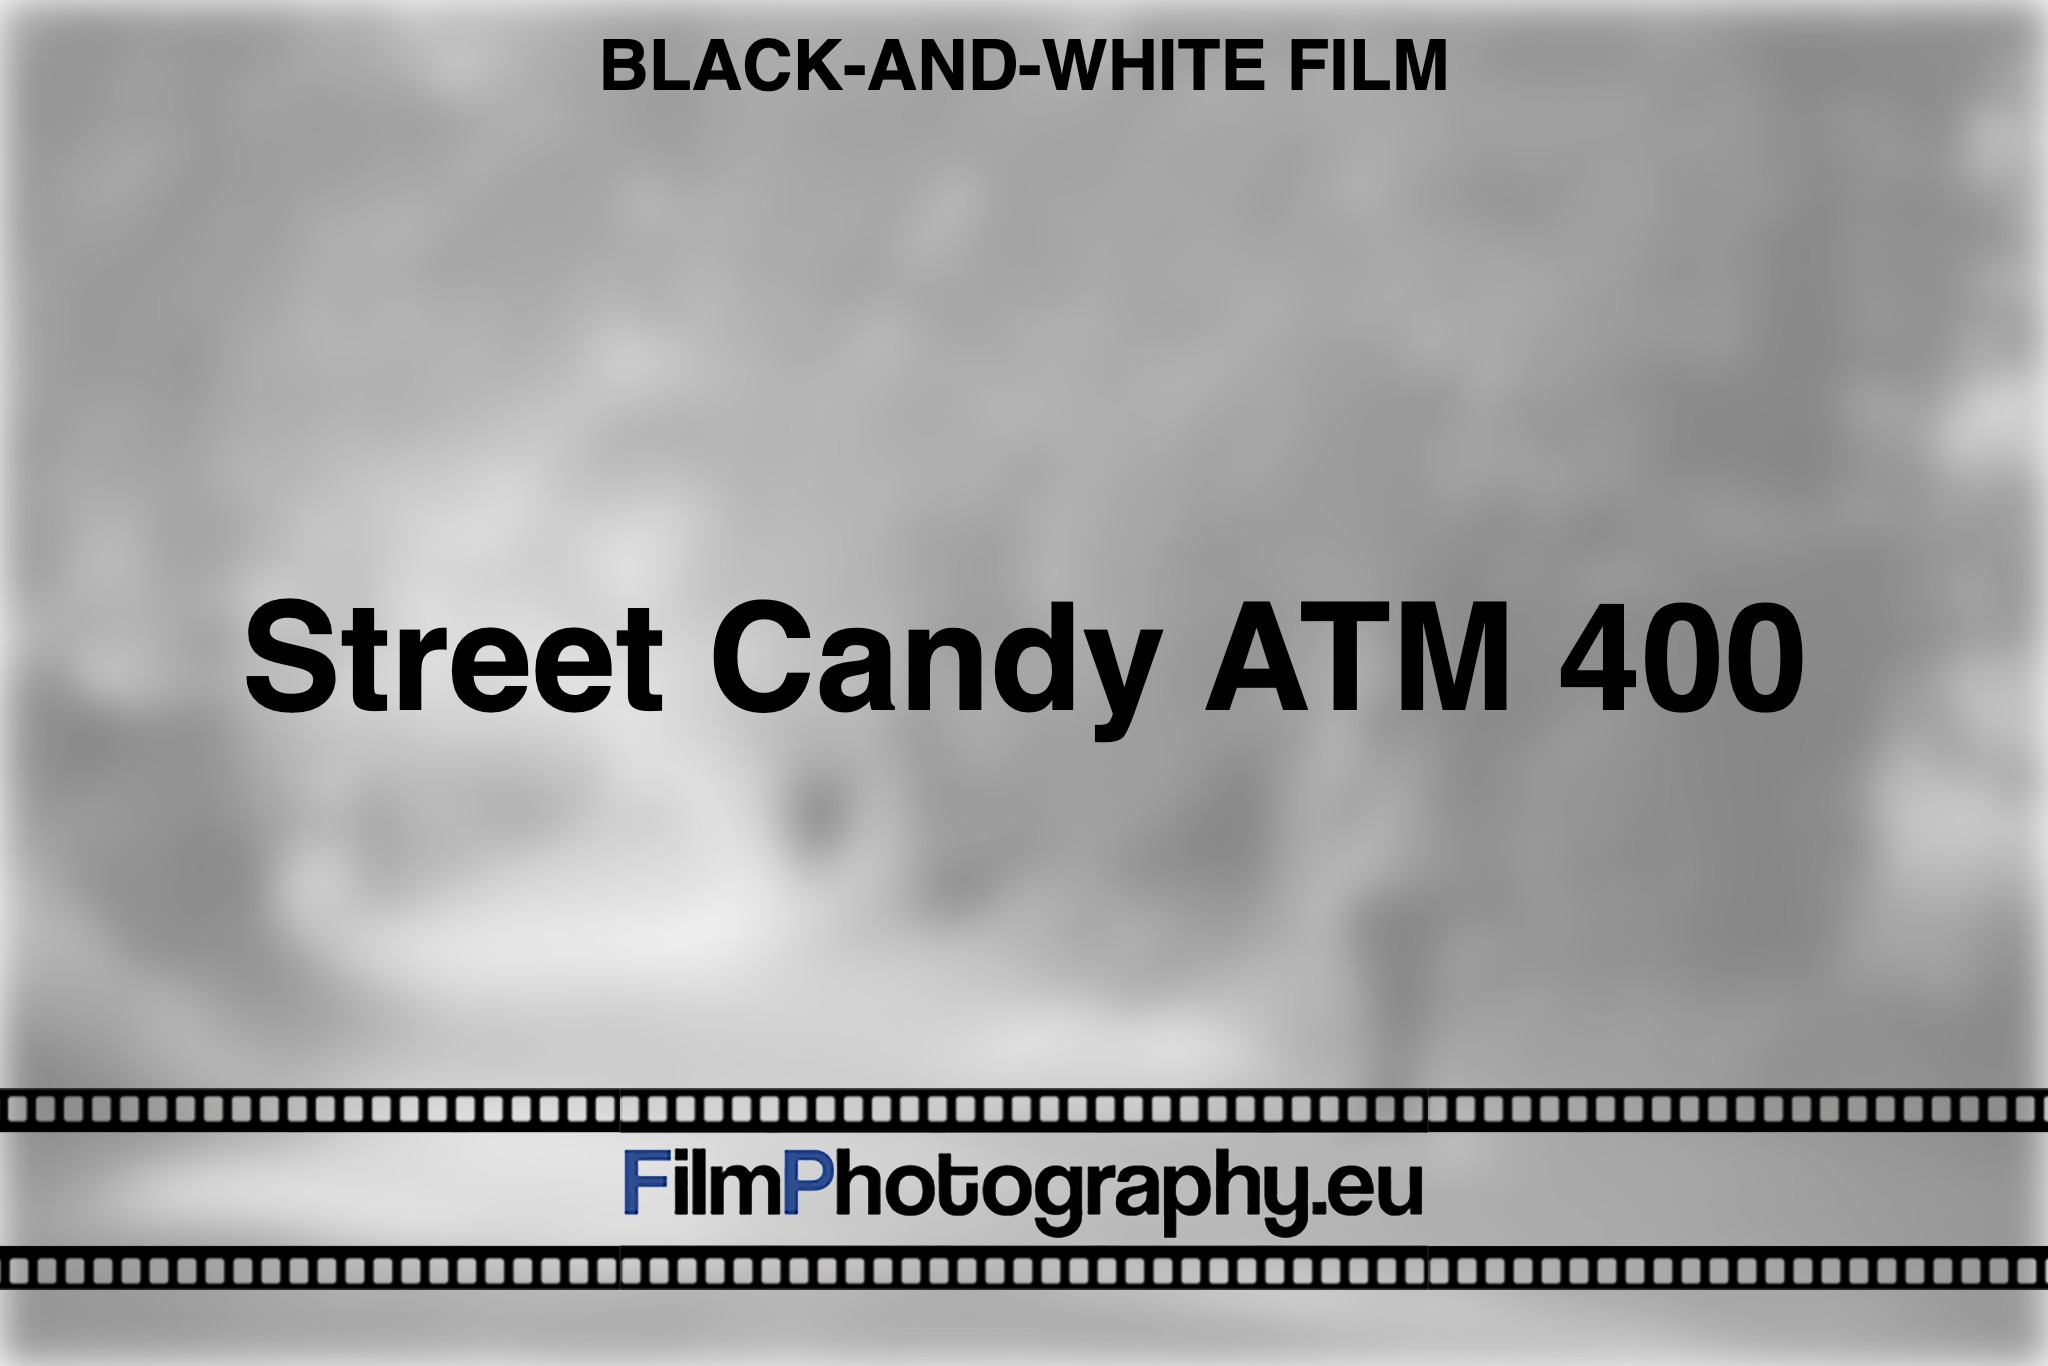 street-candy-atm-400-black-and-white-film-bnv